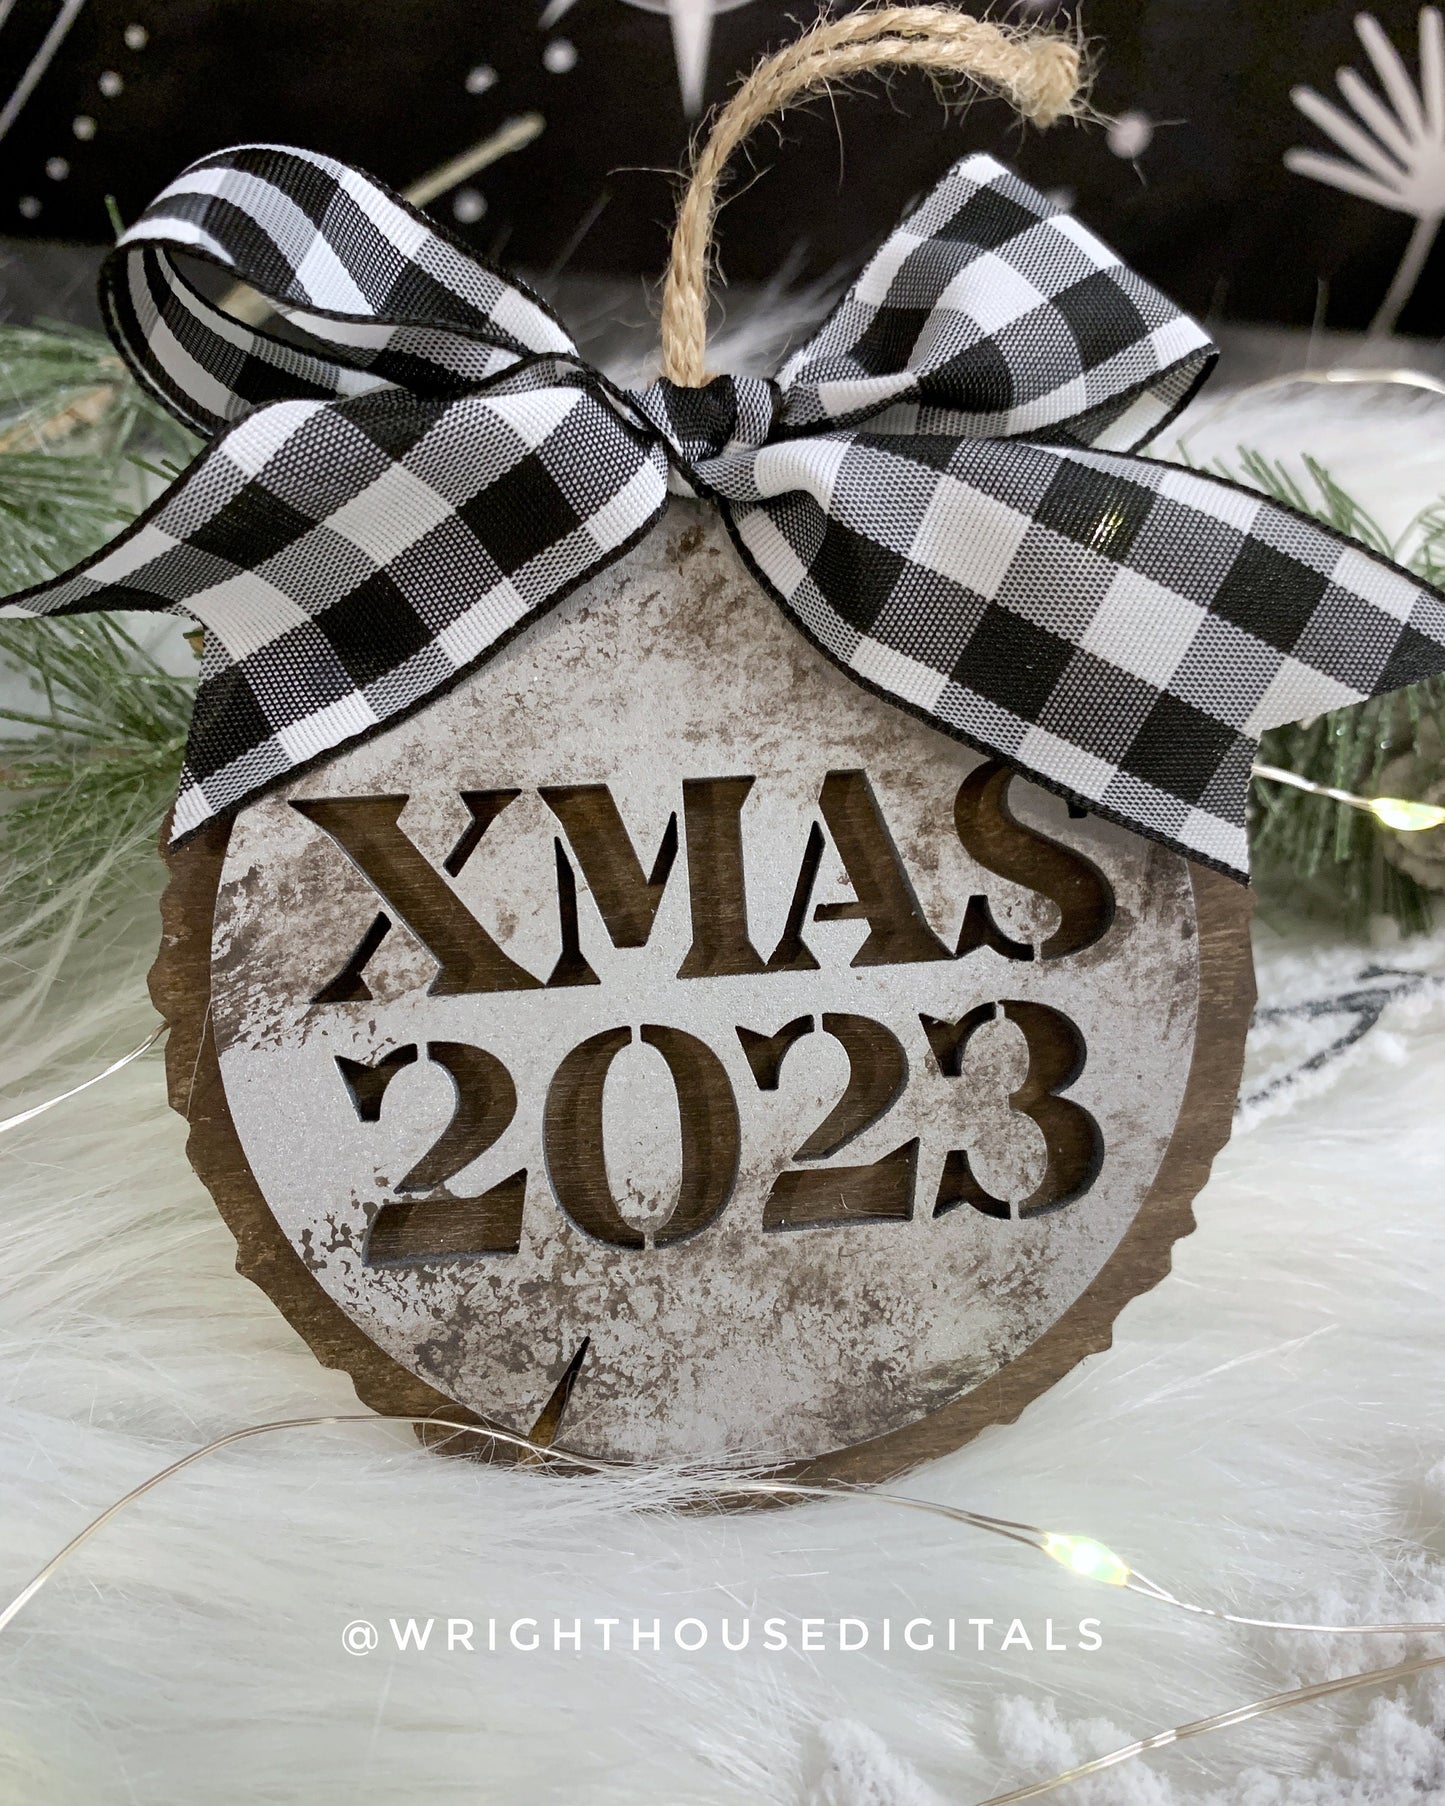 2023 Rustic Farmhouse Galvanized Cookie Tree Ornament - Yearly Ornament - Stencil Wood Slice - Ski Lodge Style Ornament and Stocking Tag